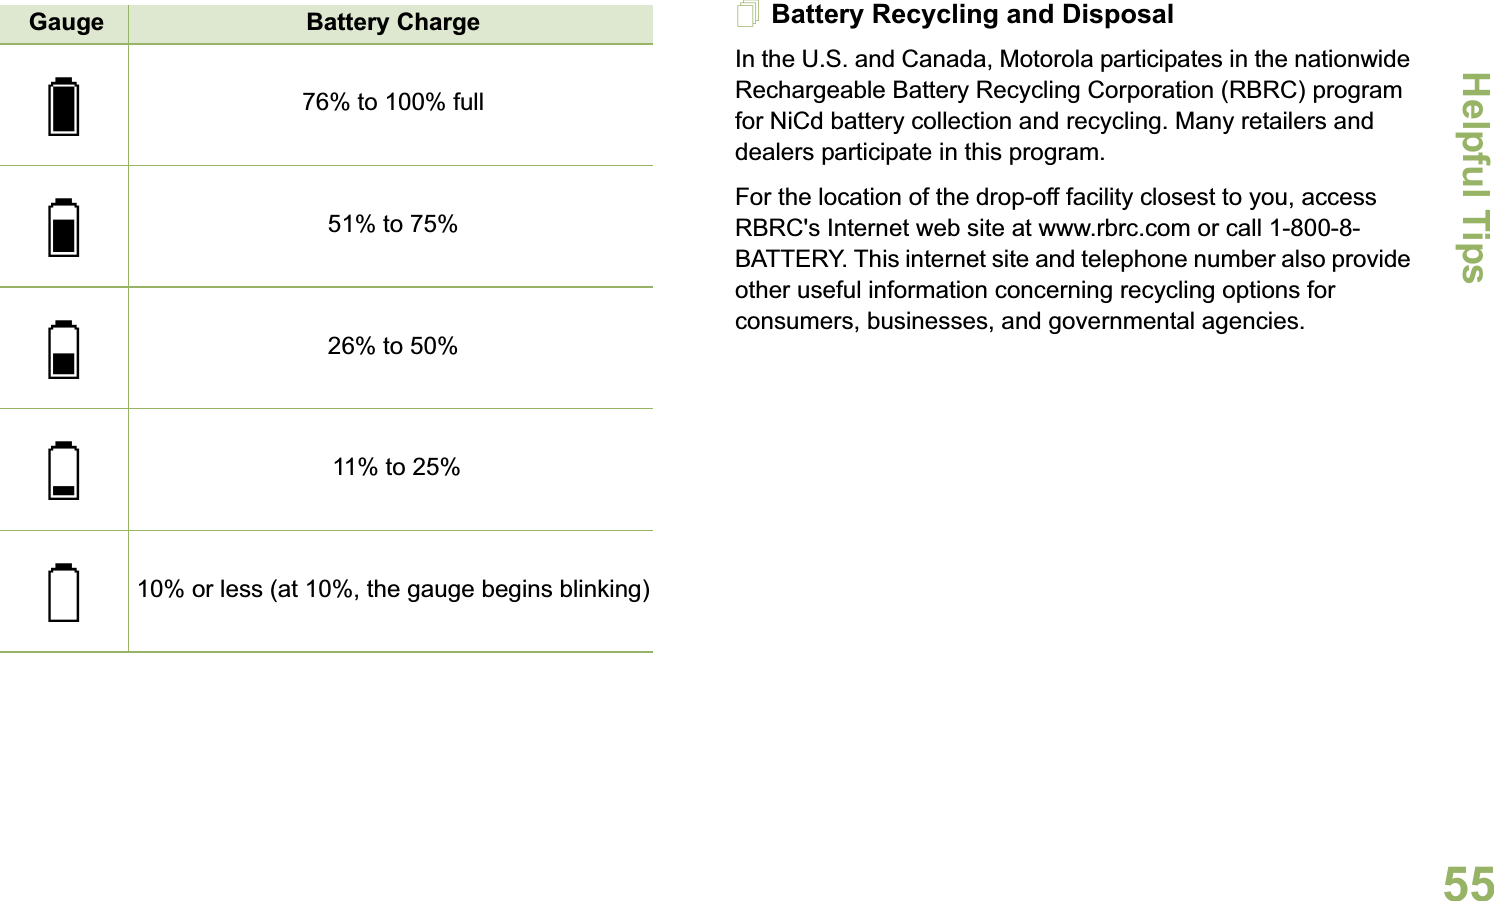 Helpful TipsEnglish55Battery Recycling and DisposalIn the U.S. and Canada, Motorola participates in the nationwide Rechargeable Battery Recycling Corporation (RBRC) program for NiCd battery collection and recycling. Many retailers and dealers participate in this program.For the location of the drop-off facility closest to you, access RBRC&apos;s Internet web site at www.rbrc.com or call 1-800-8-BATTERY. This internet site and telephone number also provide other useful information concerning recycling options for consumers, businesses, and governmental agencies.Gauge Battery Charge76% to 100% full51% to 75%26% to 50% 11% to 25%10% or less (at 10%, the gauge begins blinking)UTSRQ